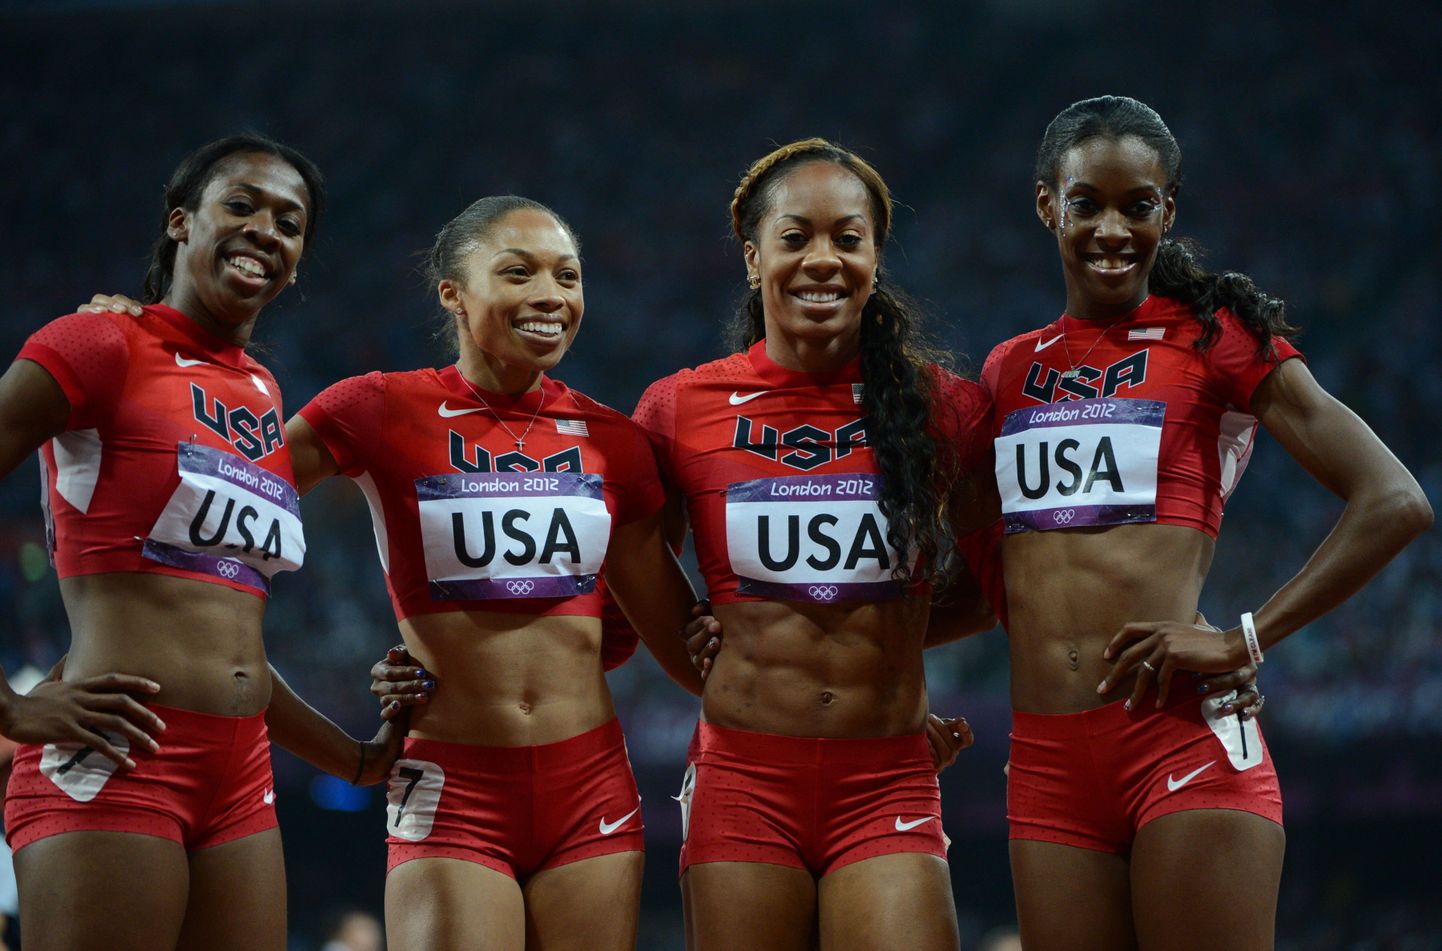 US' Francena Mccorory, US' Allyson Felix, US' Sanya Richards-Ross and US' Deedee Trotter celebrate after winning the women's 4X400 relay final at the athletics event of the London 2012 Olympic Games on August 11, 2012 in London.  AFP PHOTO / OLIVIER MORIN